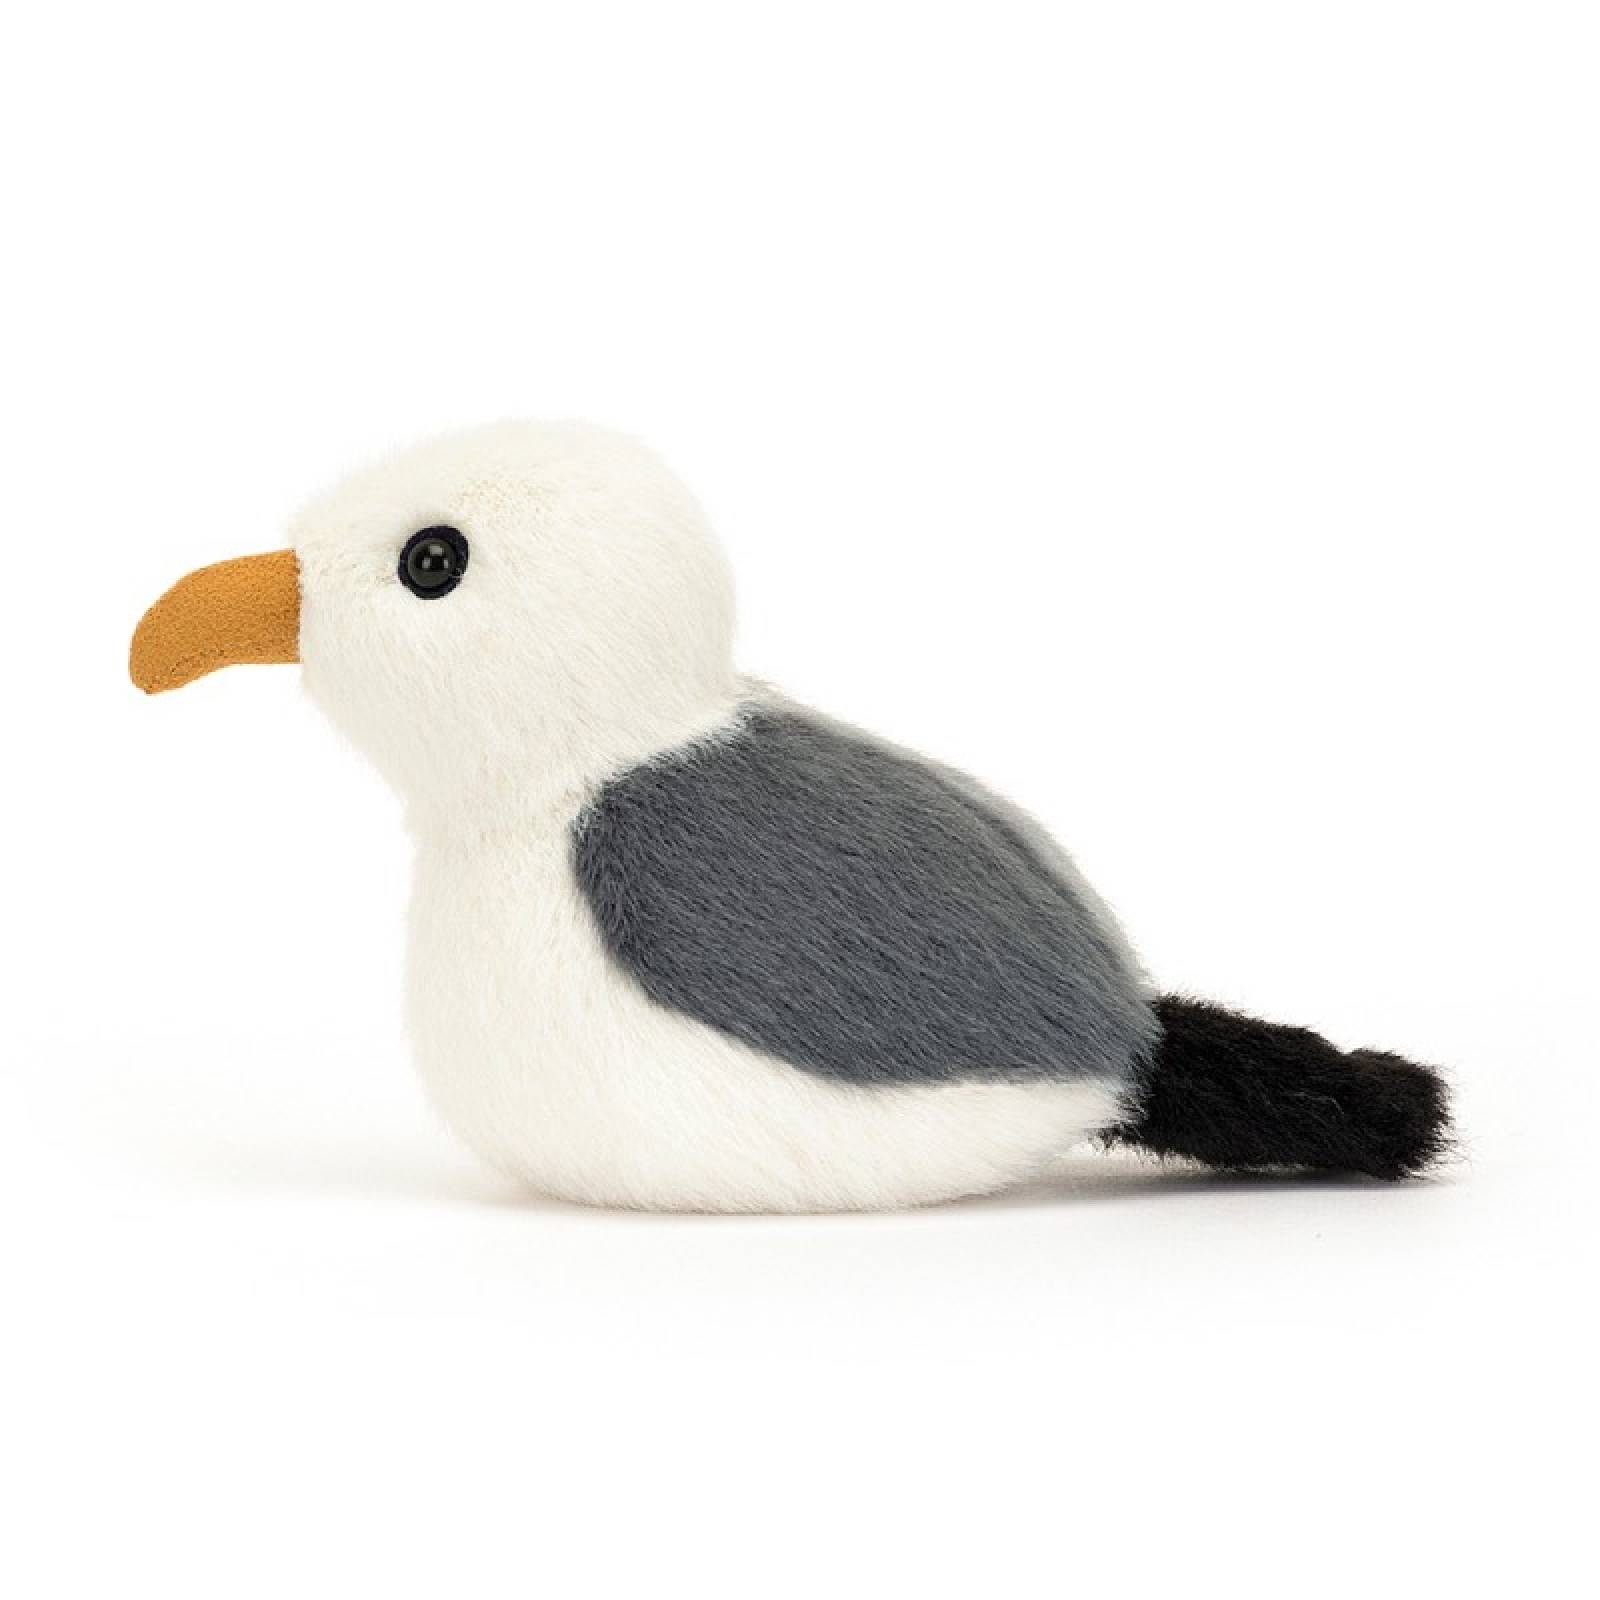 Birdling Seagull Soft Toy By Jellycat 0+ thumbnails